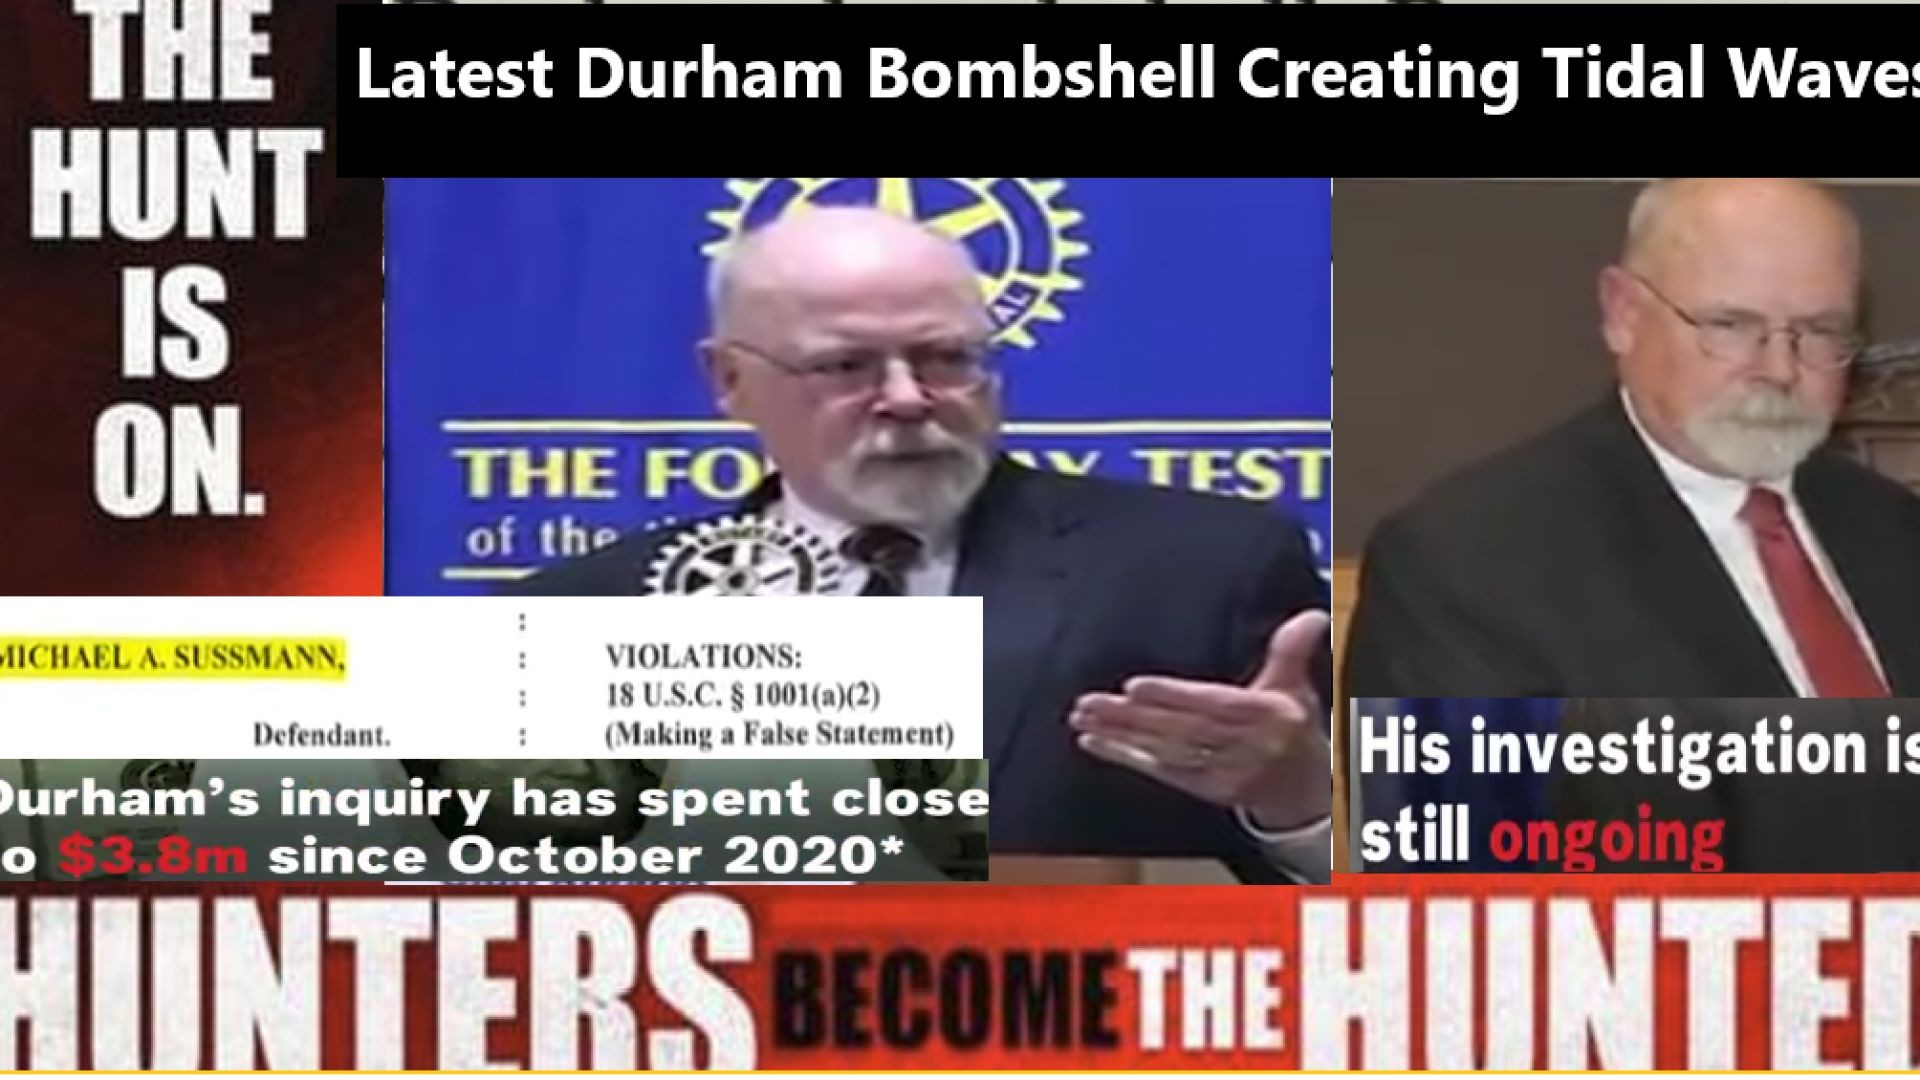 ⁣Latest Durham Bombshell Creating Tidal Waves - THE WORD CONSPIRACY Officially Used to Accuse Hillar